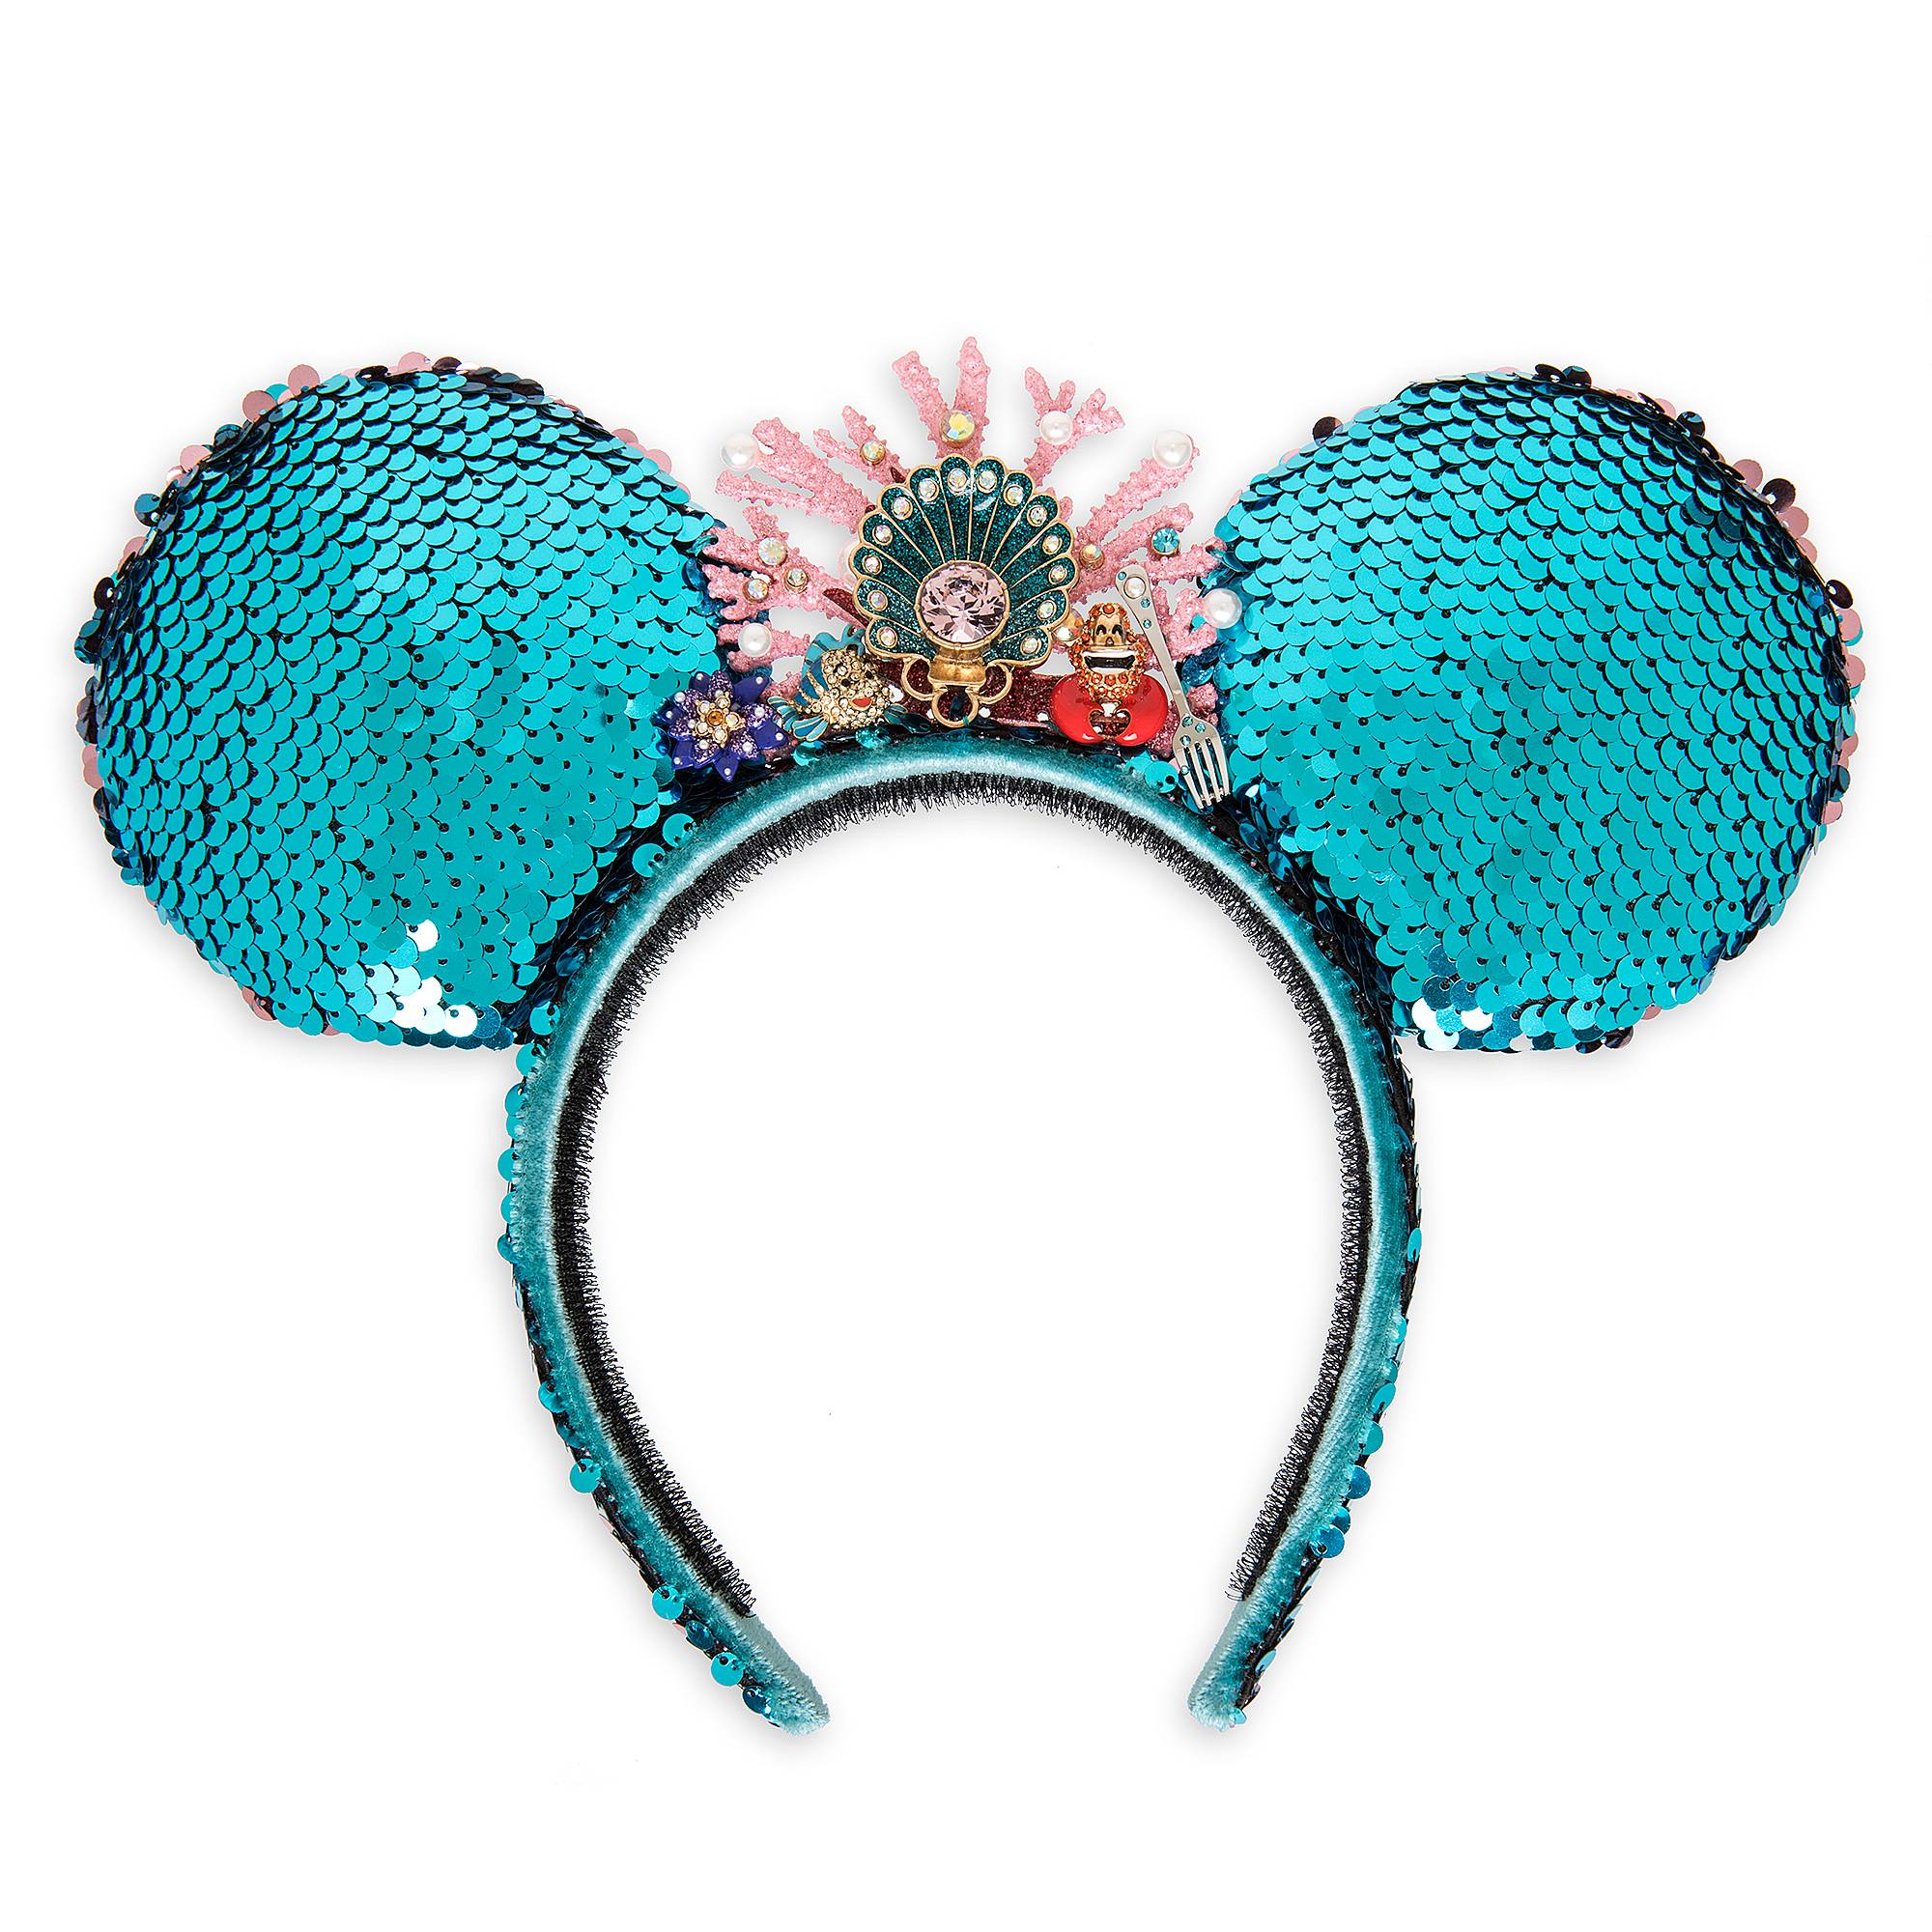 The Little Mermaid-Inspired Reversible Sequin Ear Headband by Betsey Johnson – Limited Release image